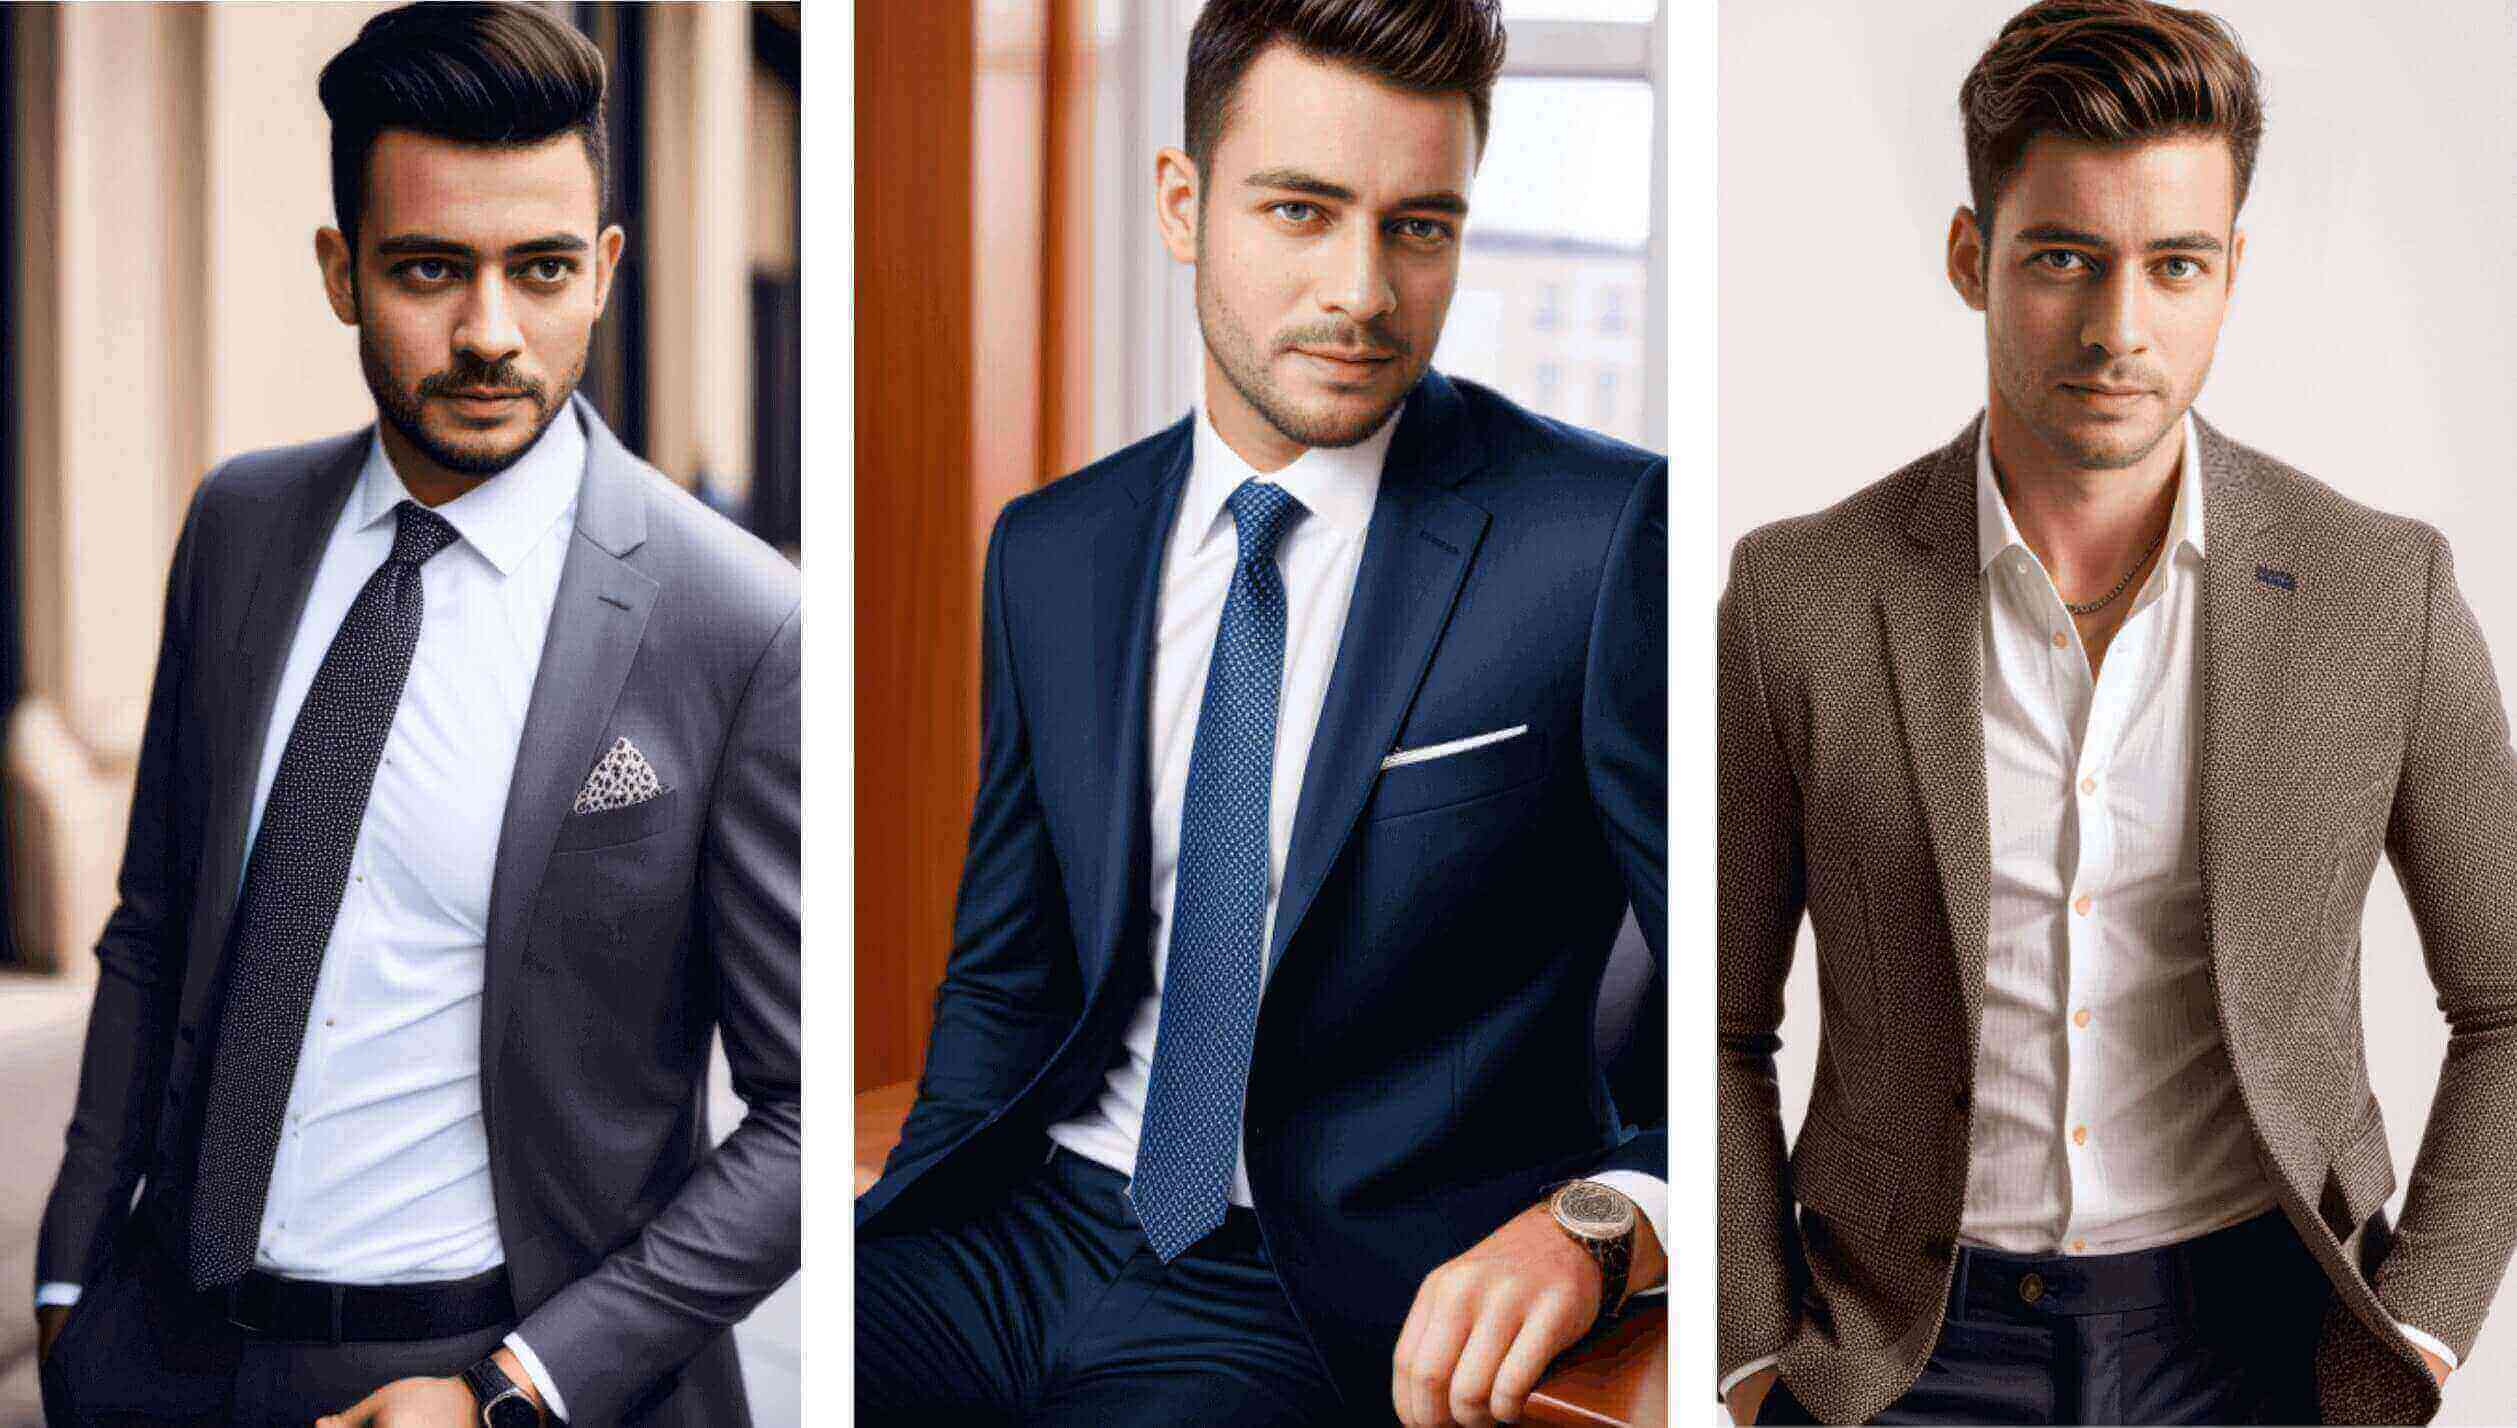 25 Posing Ideas For Men To Slay All Your Pictures | Formal men outfit, Well  dressed men, Mens photoshoot poses